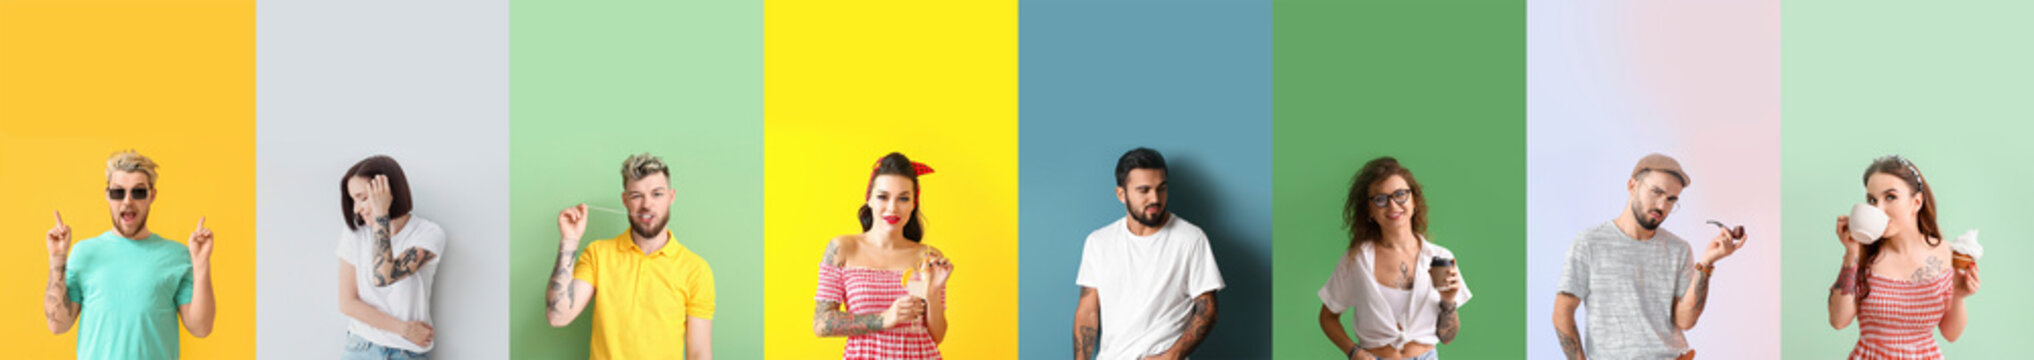 Set of different tattooed people on colorful background